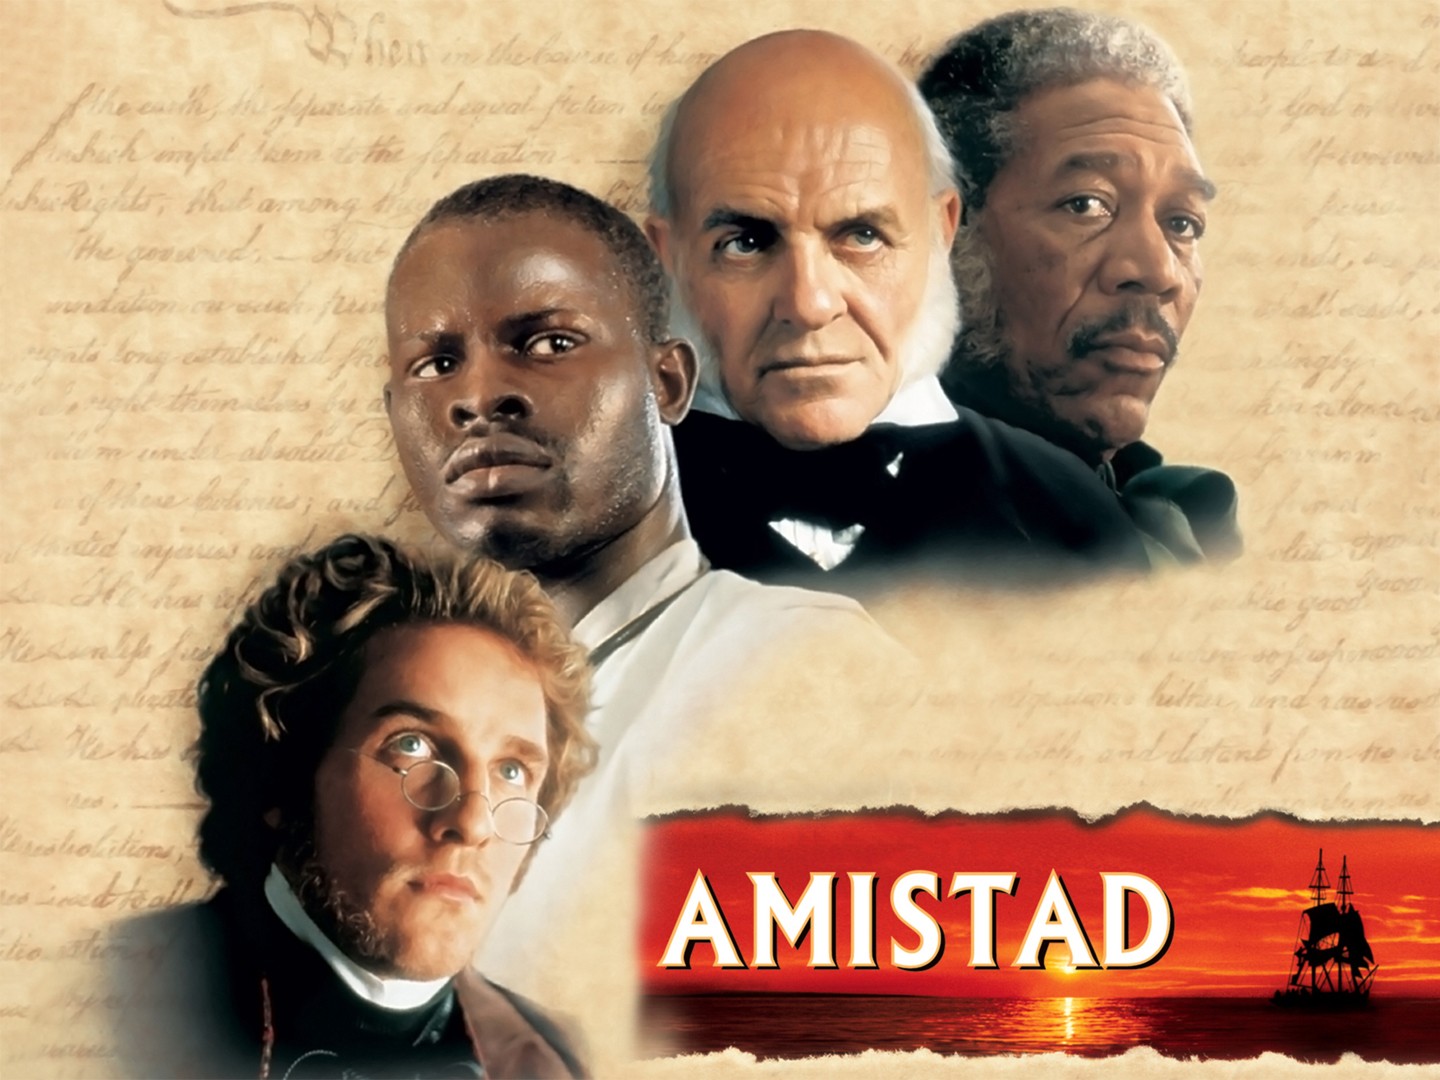 Watch Amistad in 1080p on Soap2day